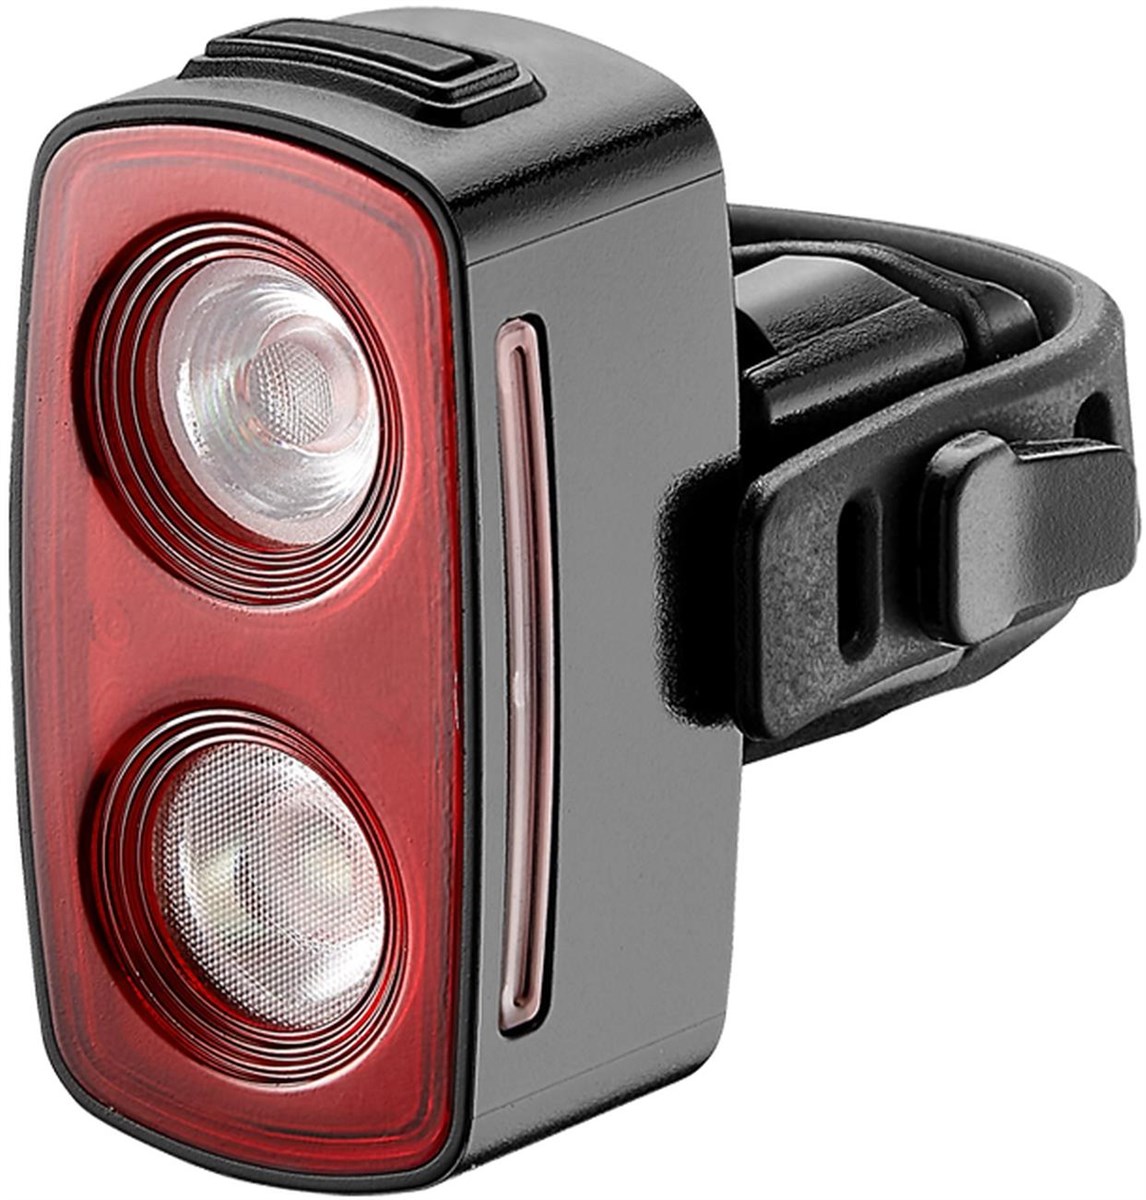 Momentum Recon TL200 Rear Light product image